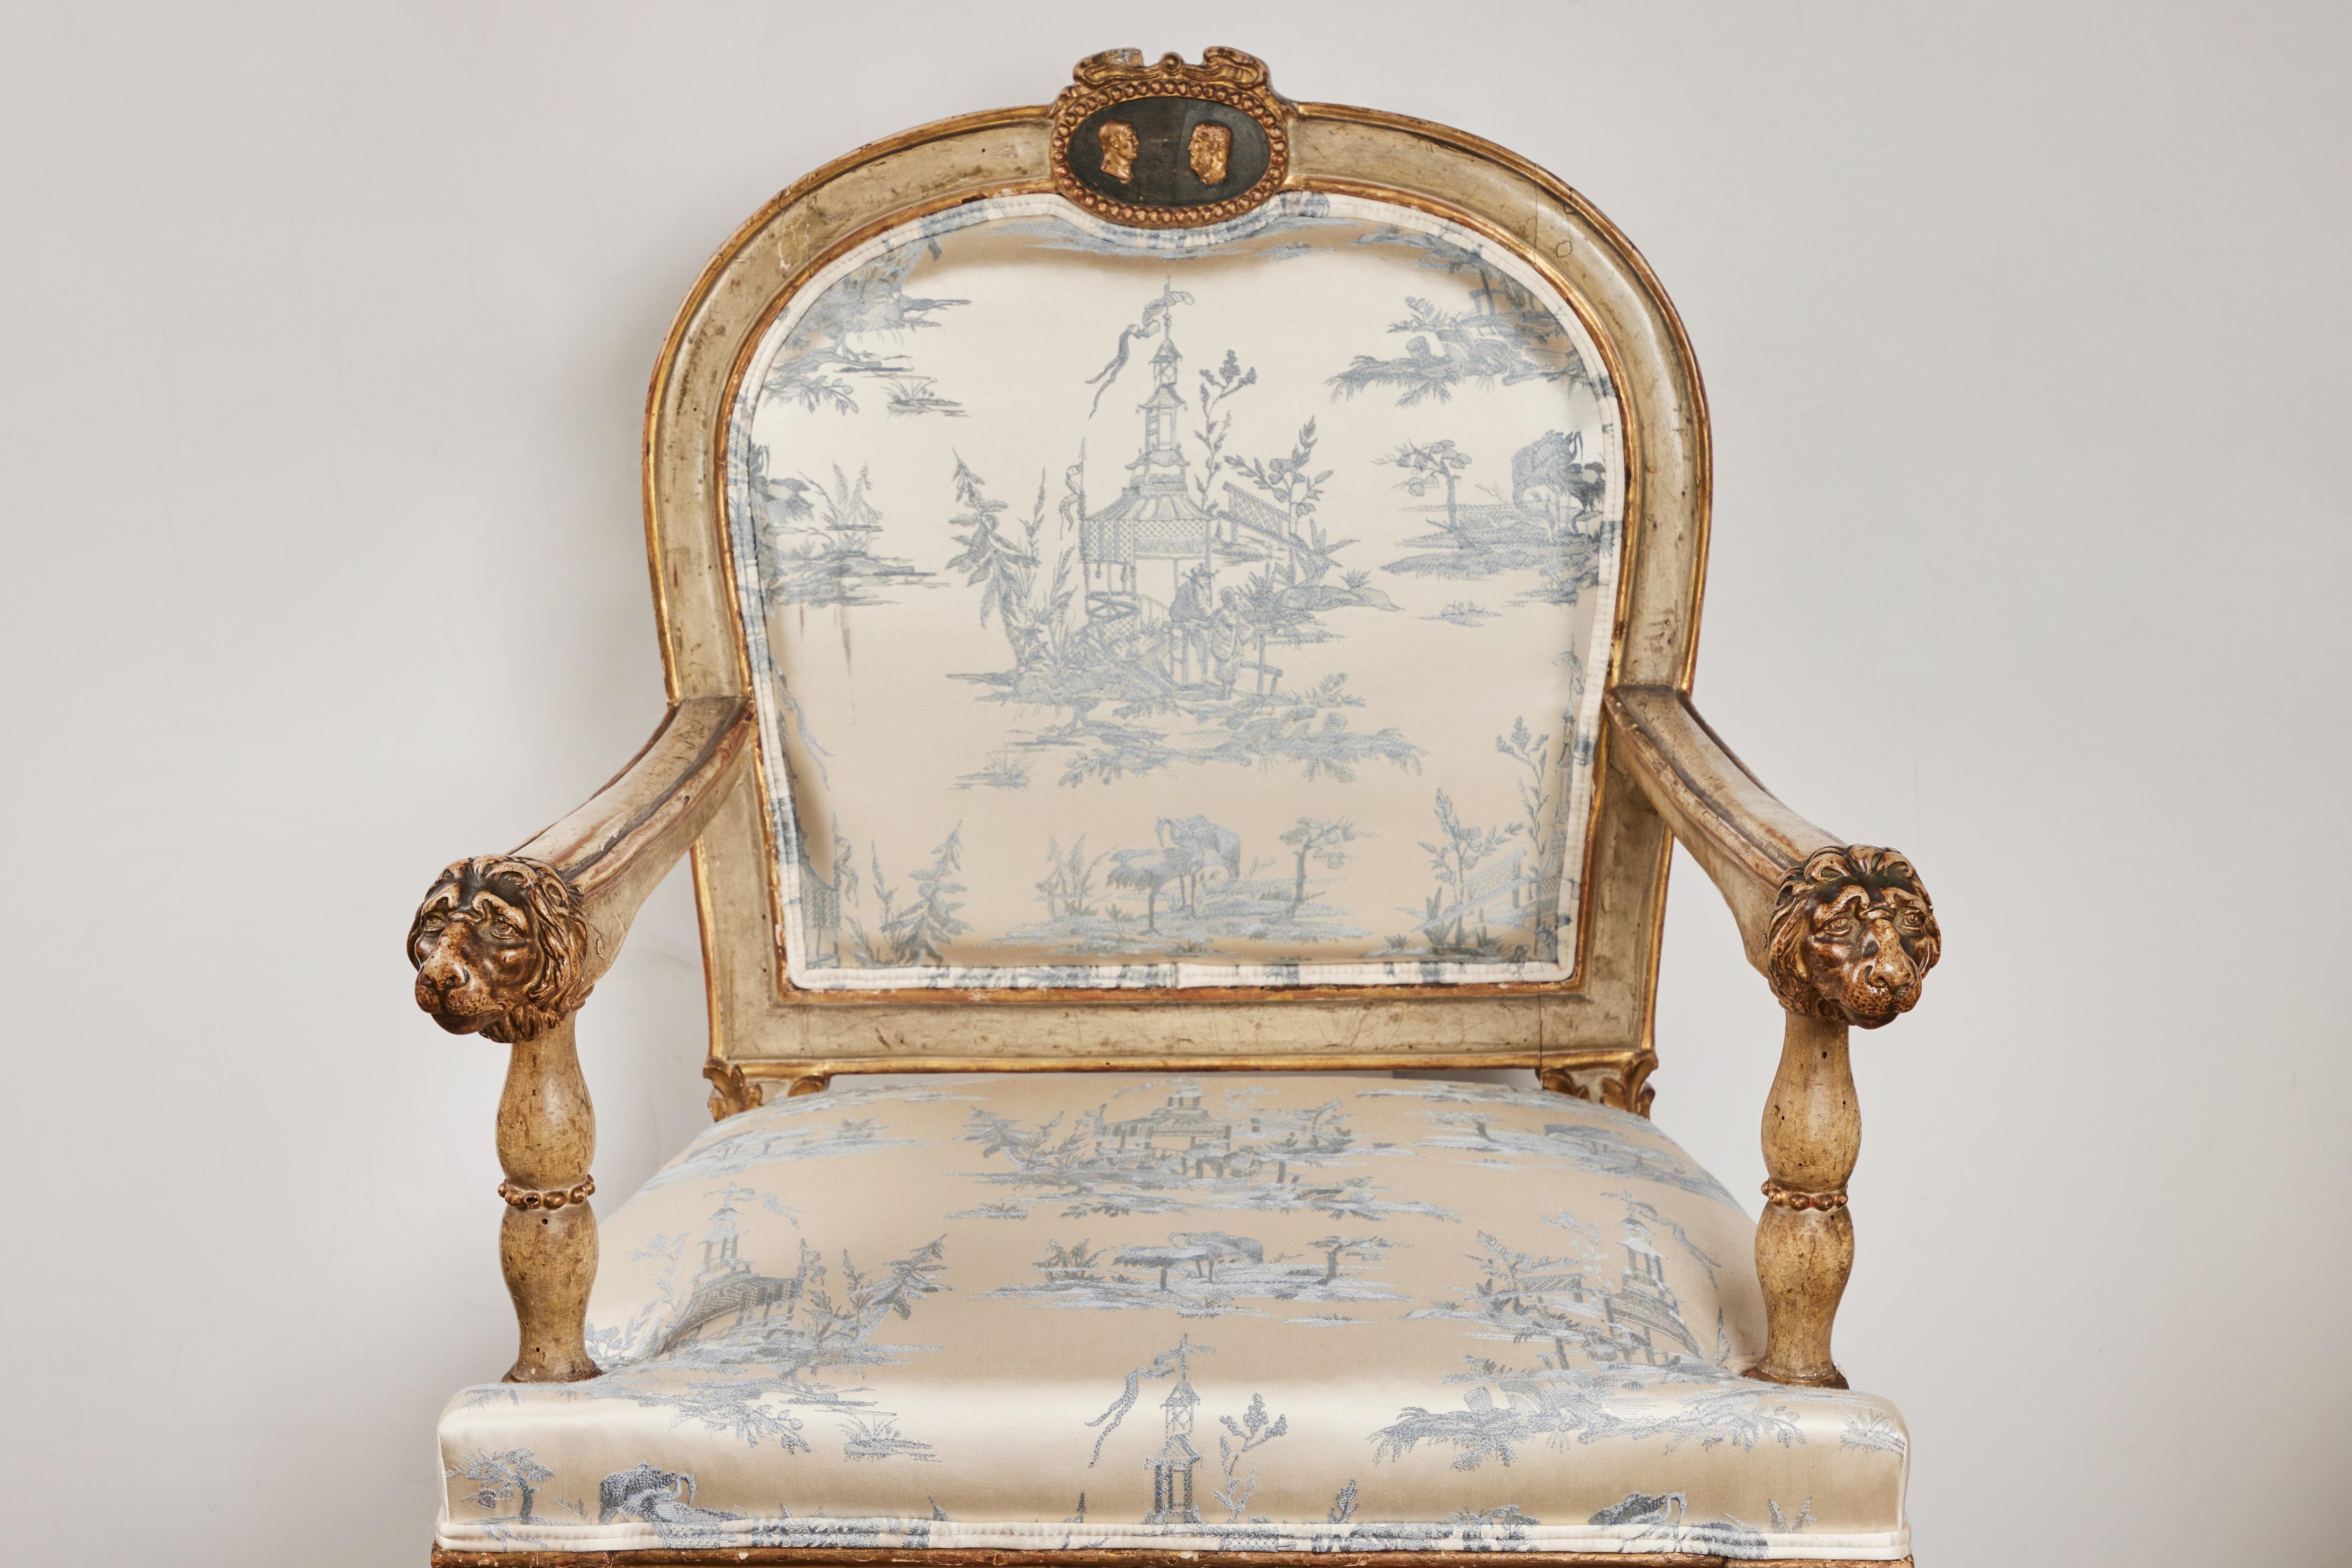 Hand carved, painted and parcel gilt armchair from the area of Rome. Design features include lions head on arms, facing male profiles and bird reliefs, beaded pattern and fluted legs. New Silk Chinoiserie themed upholstery.